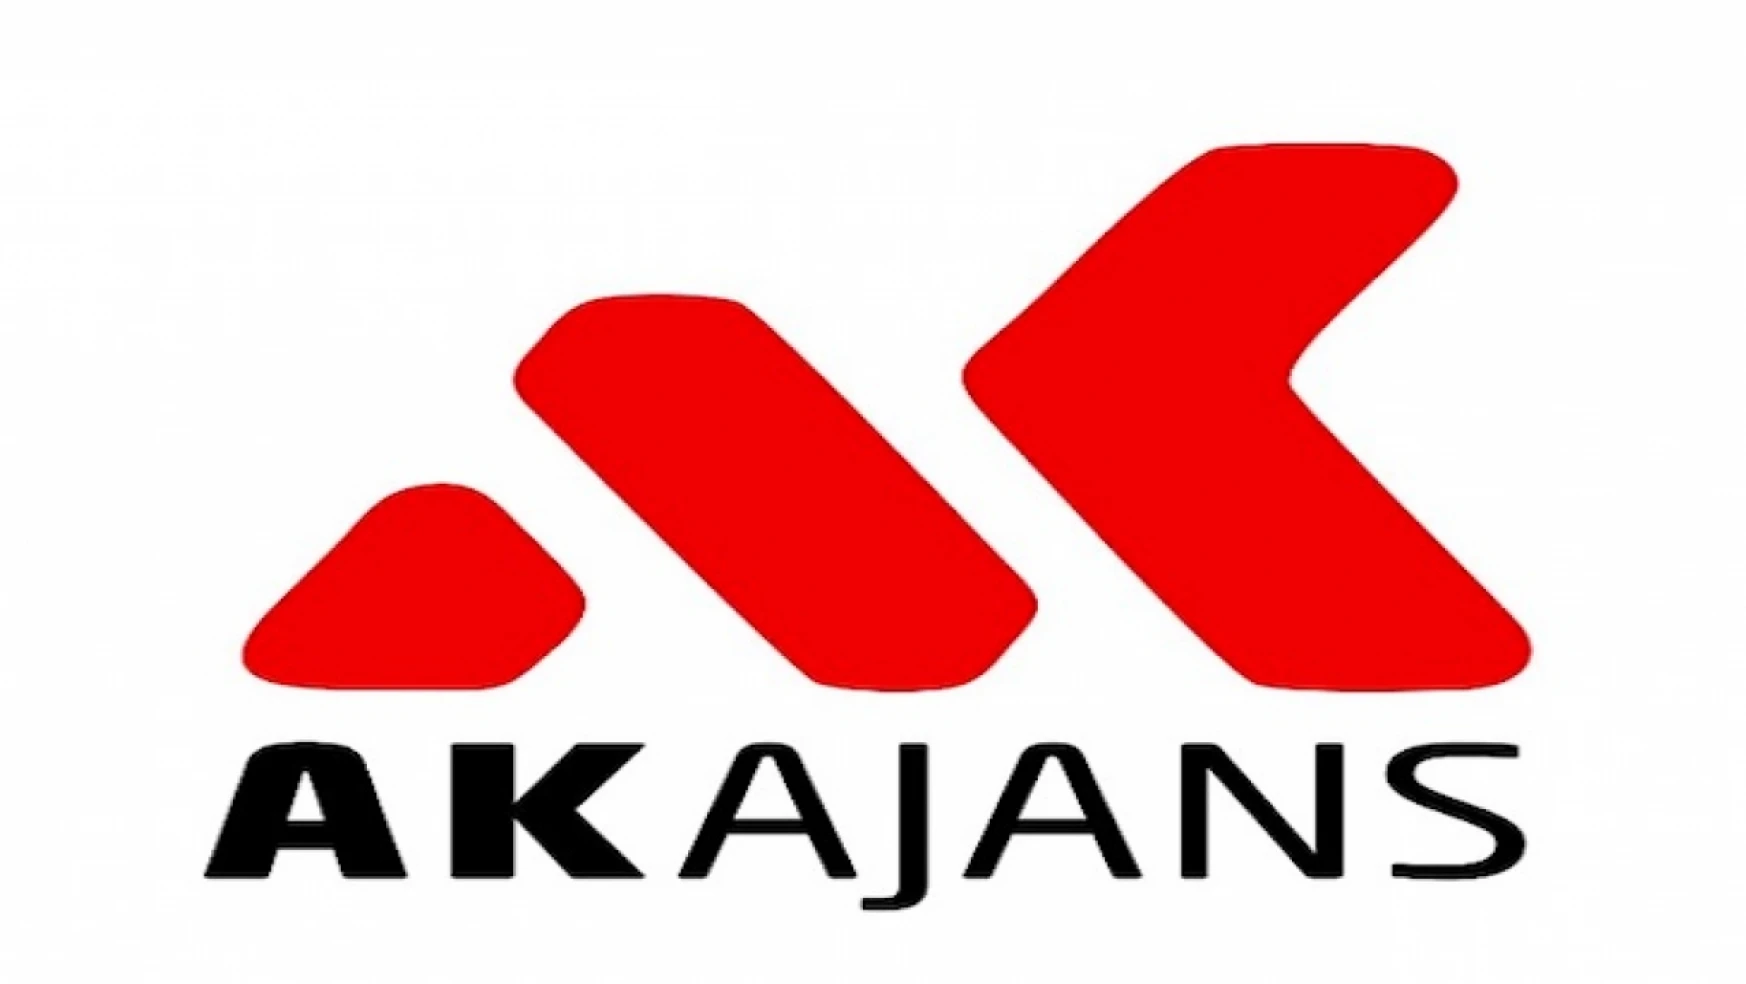 The brand of the famous news agency AKAJANS in Turkey is now for sale